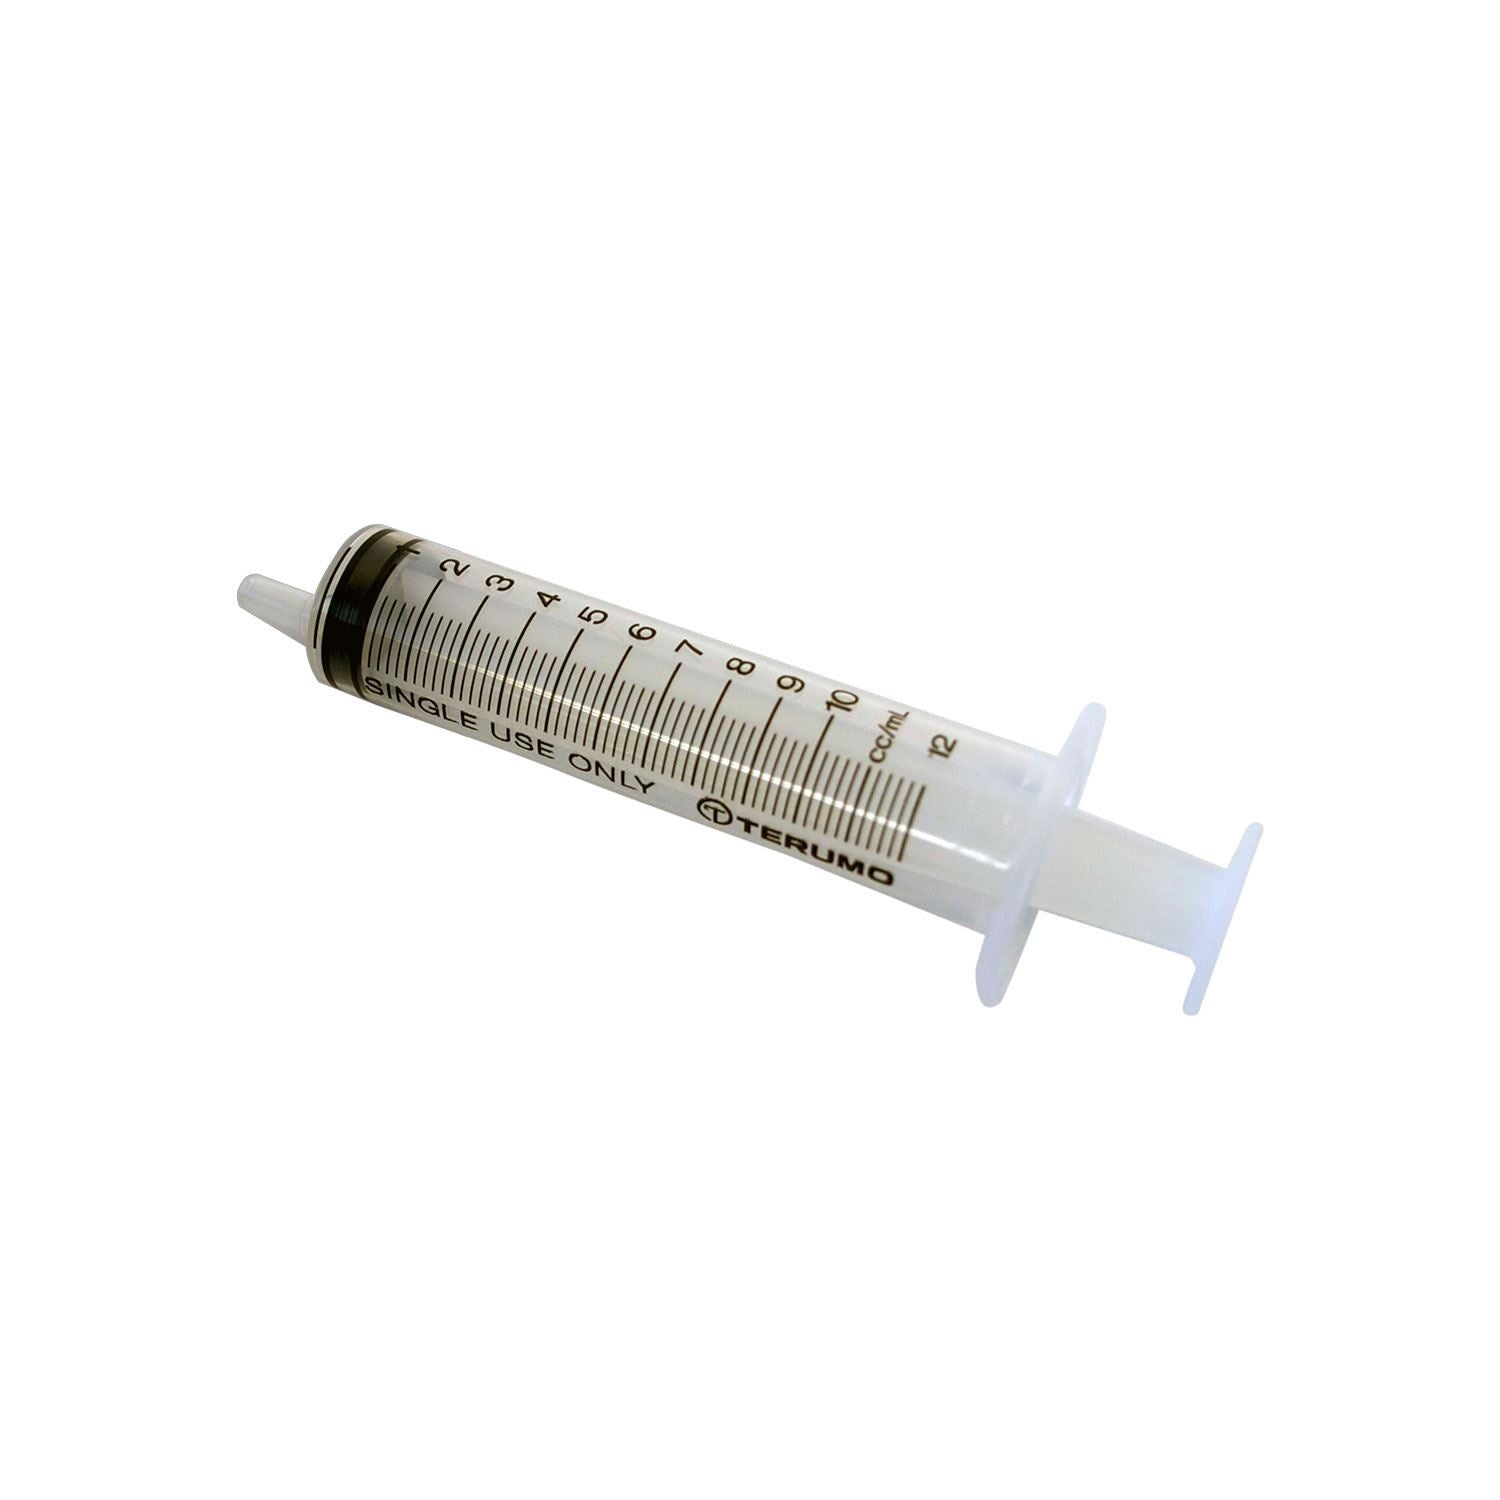 Nettex Disposable Syringe - Just Horse Riders